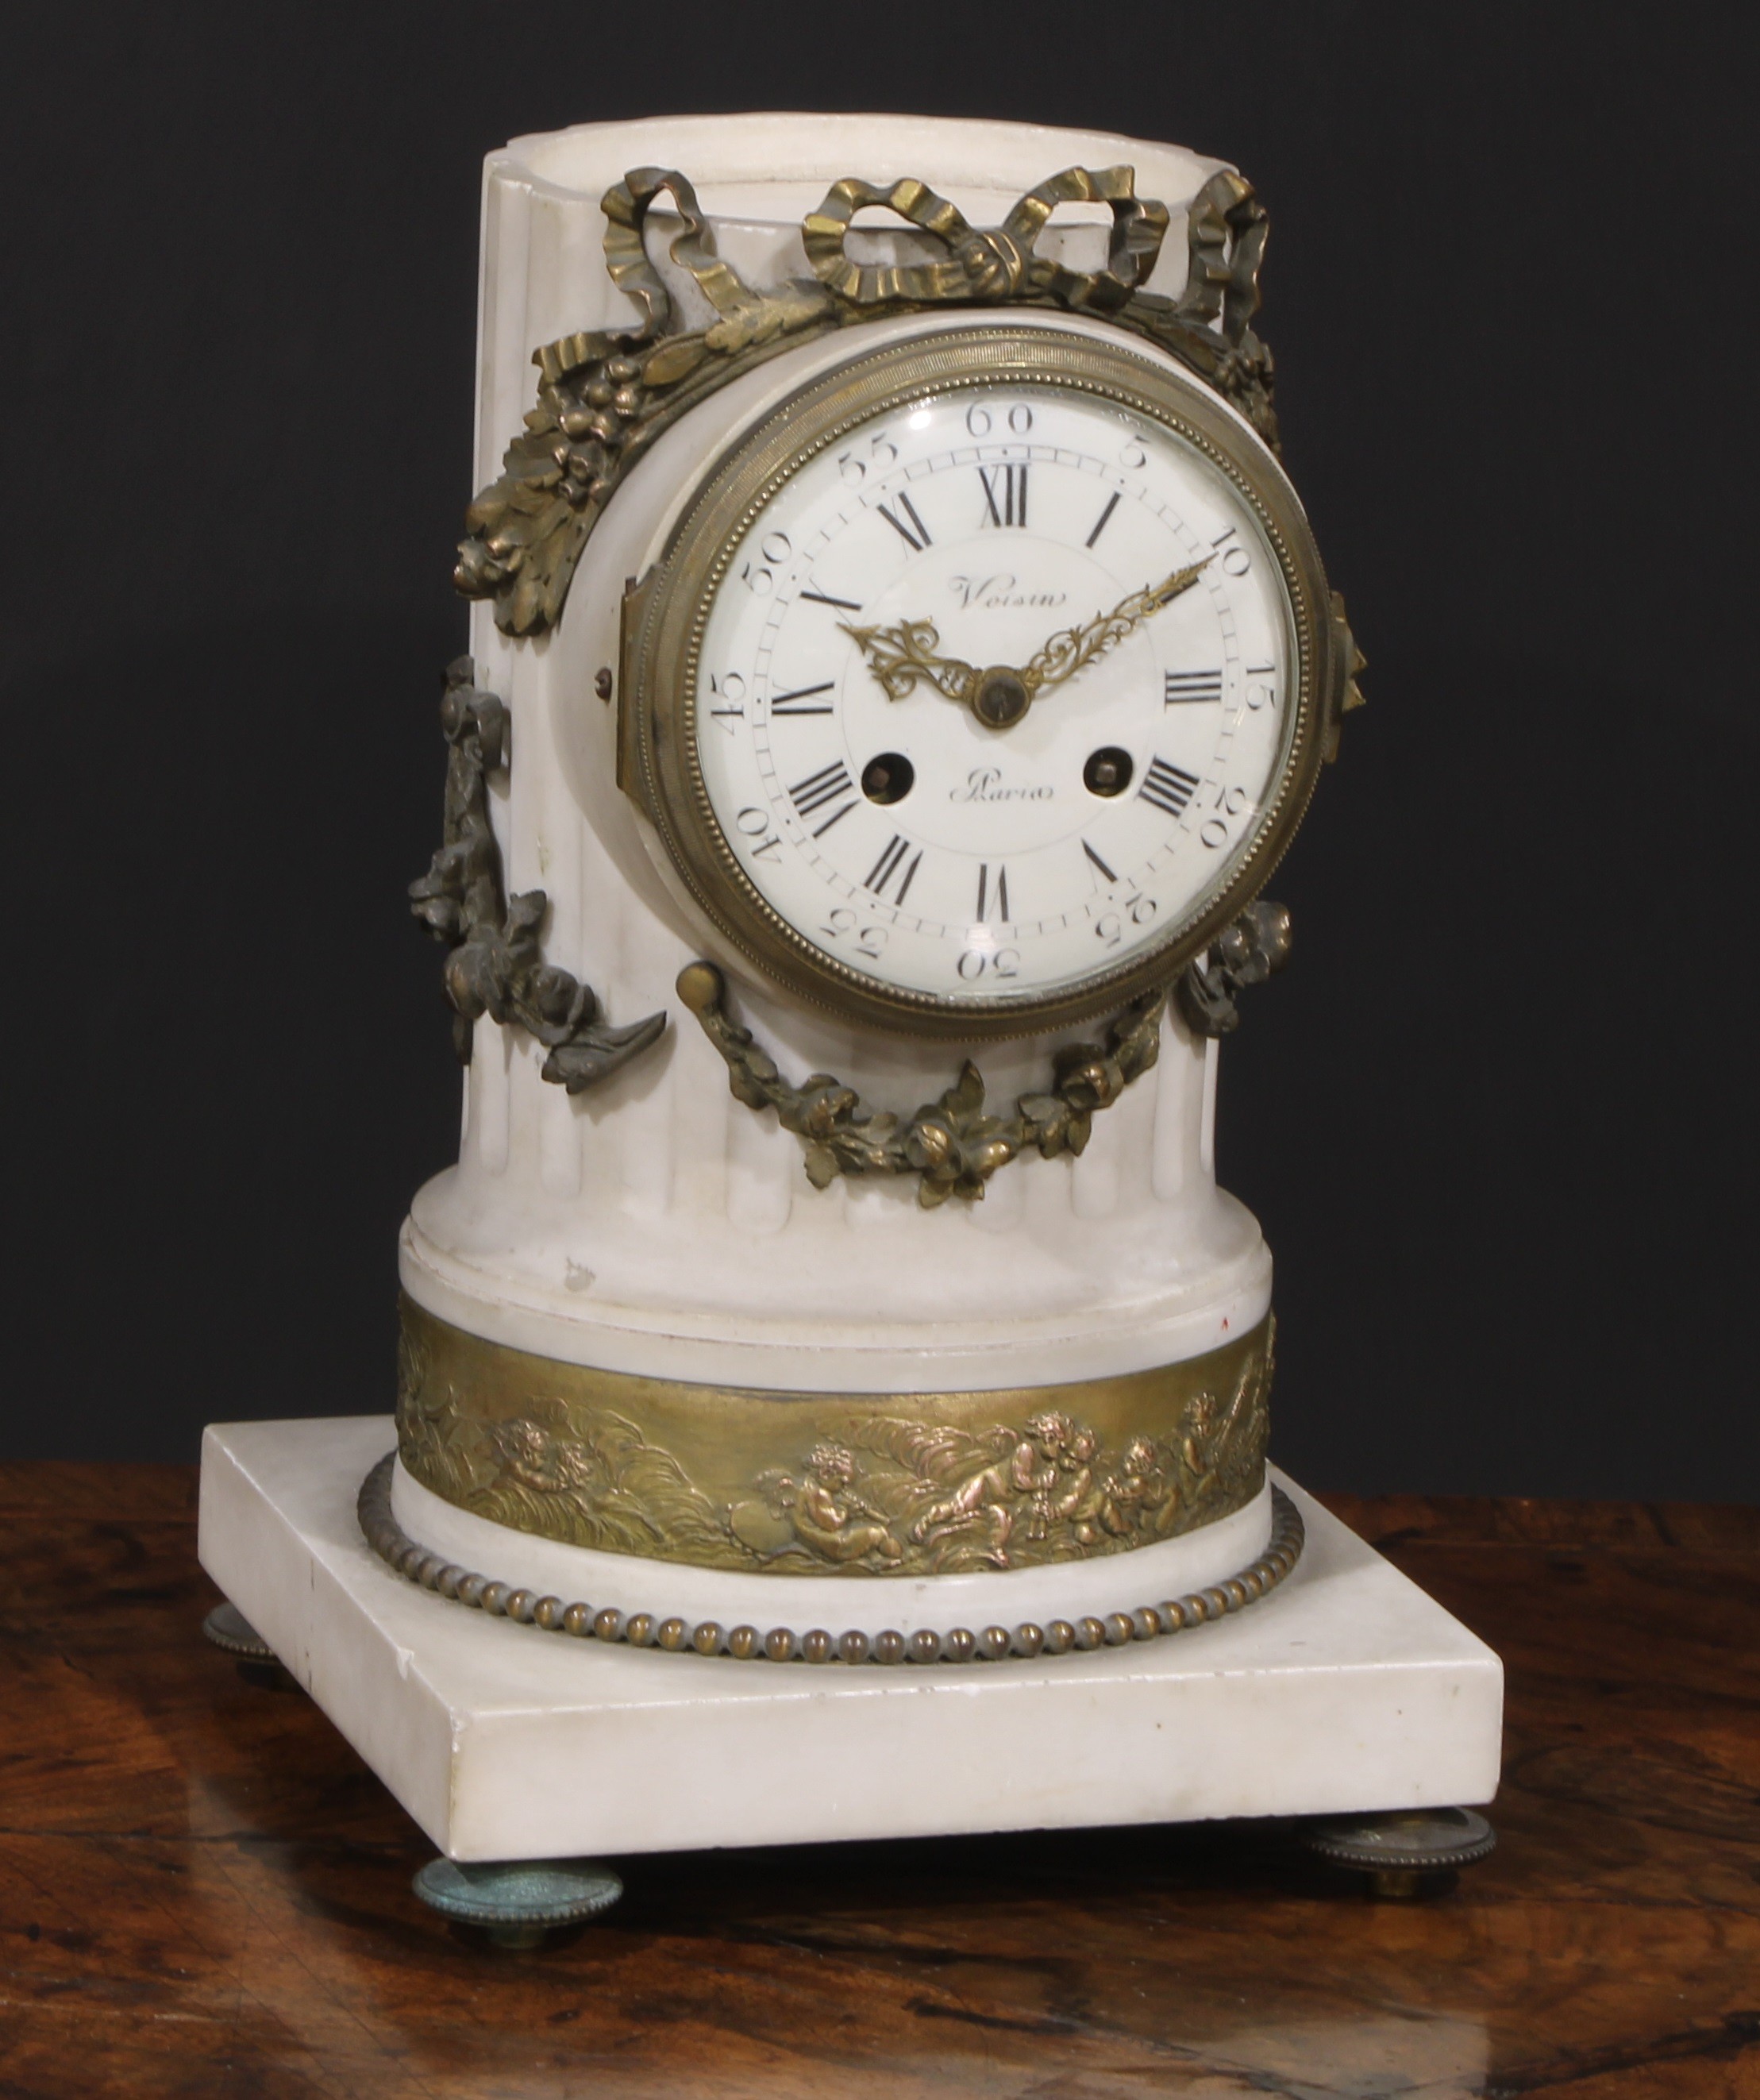 A 19th century gilt bronze mounted cararra marble architectural mantel clock, in the Grand Tour